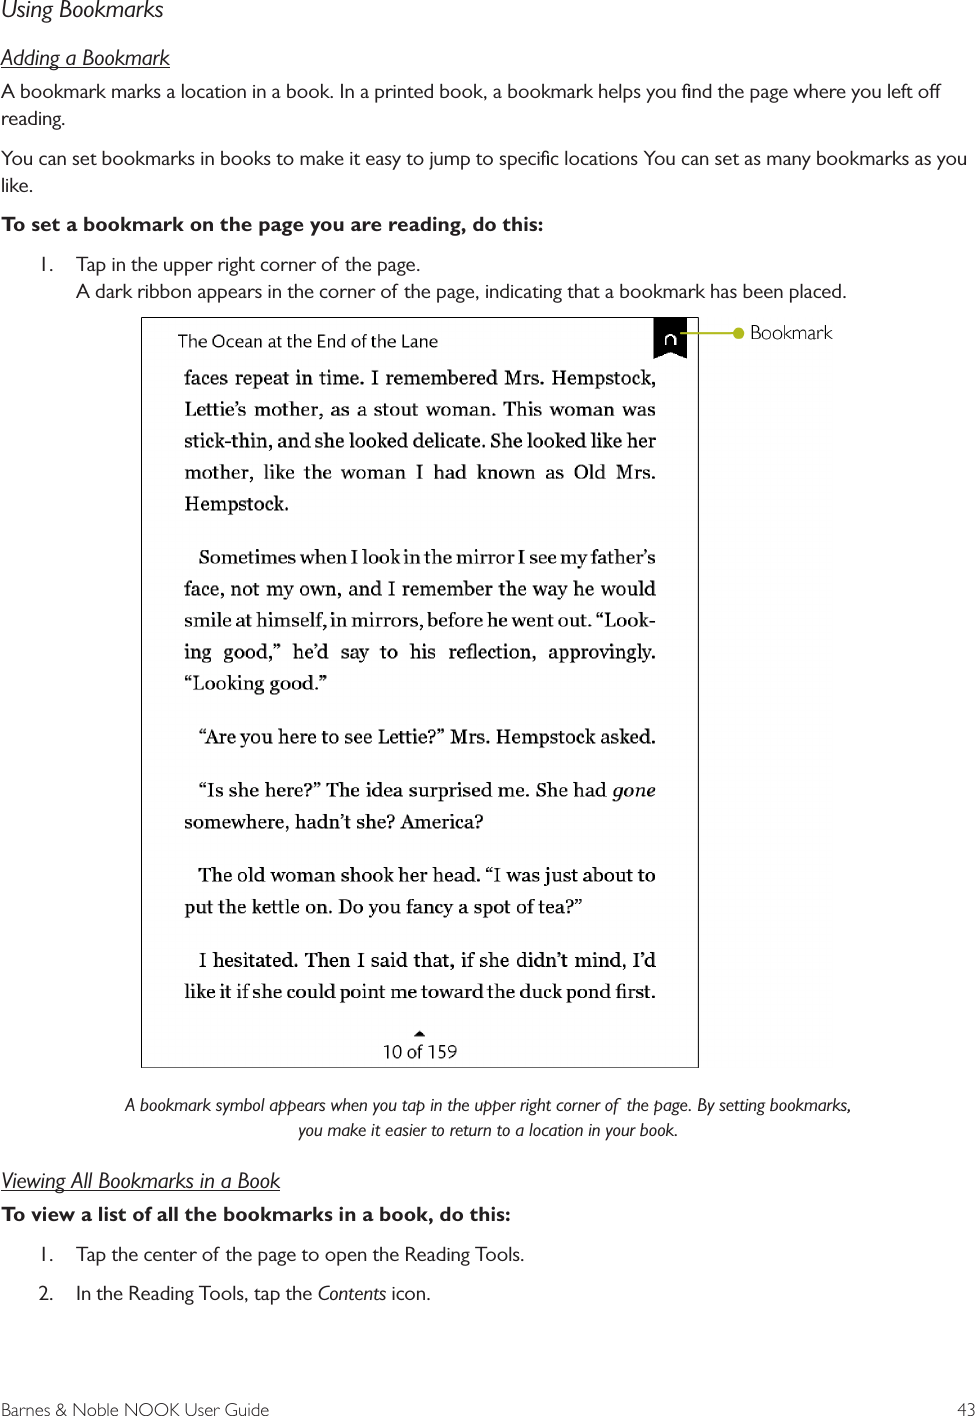 Barnes &amp; Noble NOOK User Guide  43Using BookmarksAdding a BookmarkA bookmark marks a location in a book. In a printed book, a bookmark helps you ﬁnd the page where you left o reading. You can set bookmarks in books to make it easy to jump to speciﬁc locations You can set as many bookmarks as you like. To set a bookmark on the page you are reading, do this:1. Tap in the upper right corner of the page.A dark ribbon appears in the corner of the page, indicating that a bookmark has been placed.A bookmark symbol appears when you tap in the upper right corner of  the page. By setting bookmarks, you make it easier to return to a location in your book.Viewing All Bookmarks in a BookTo view a list of all the bookmarks in a book, do this:1. Tap the center of the page to open the Reading Tools.2. In the Reading Tools, tap the Contents icon.